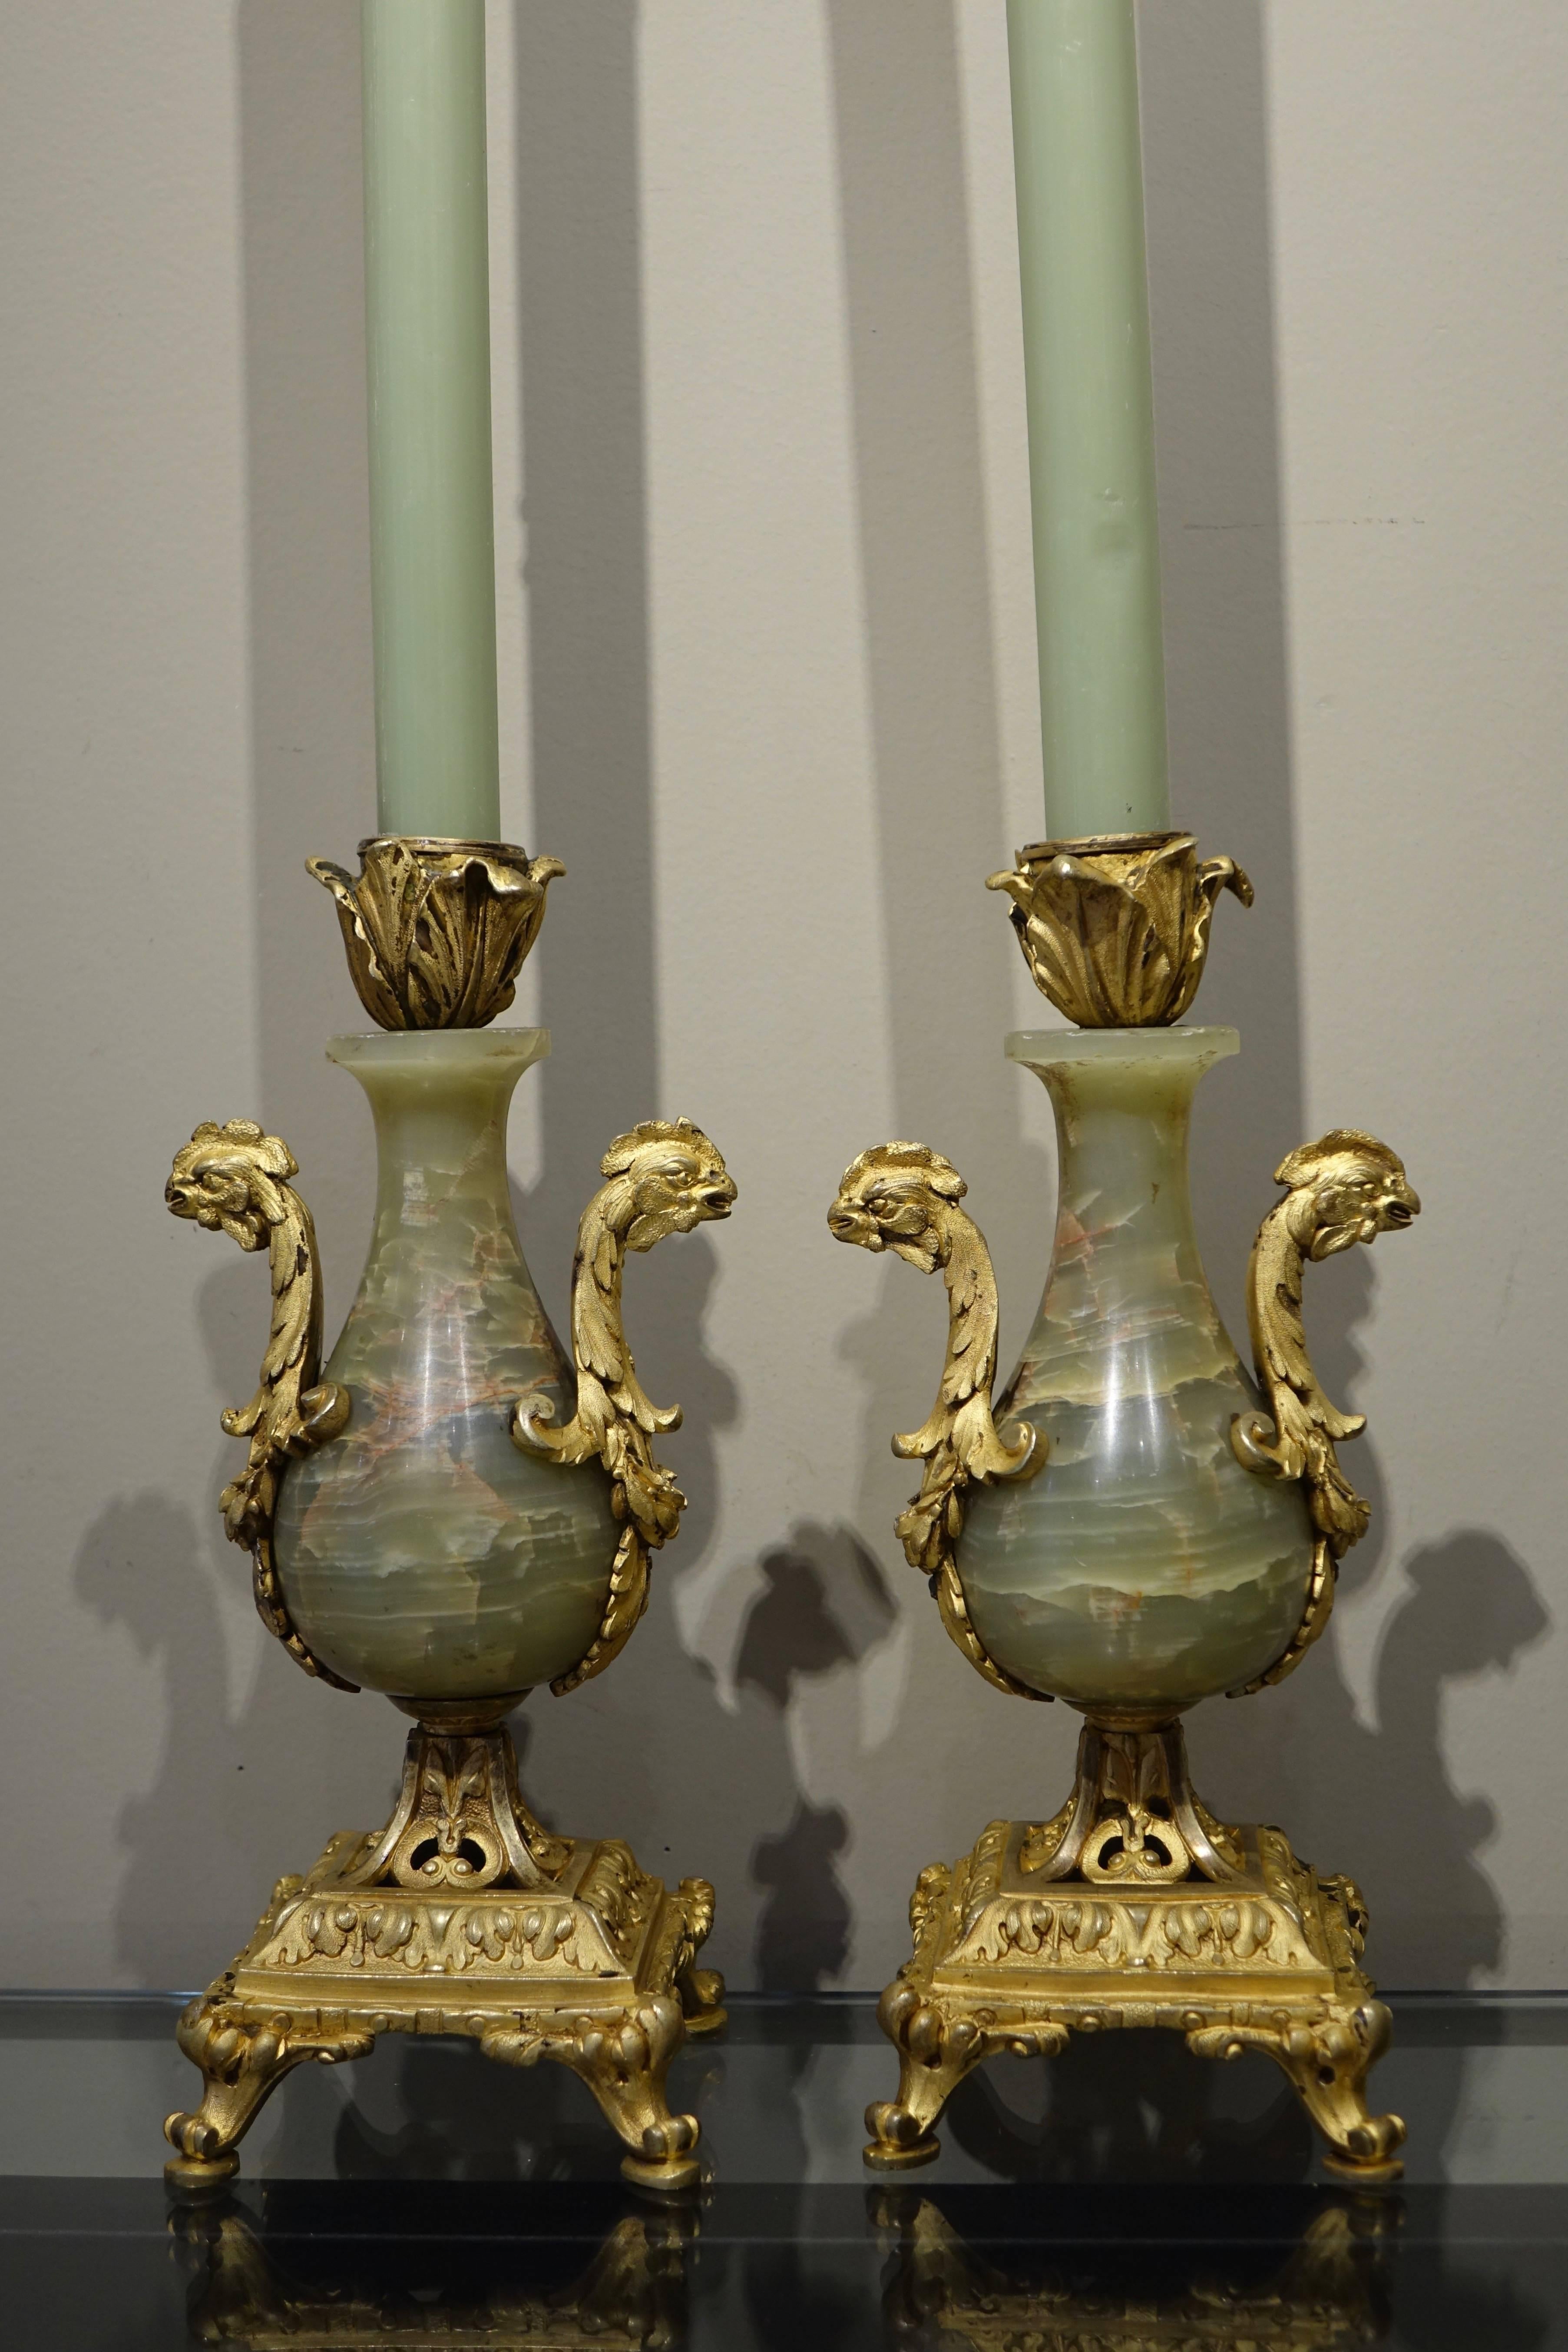 Pair of candlesticks in bronze and onyx, handles in shape of a rooster, France, circa 1870.
     